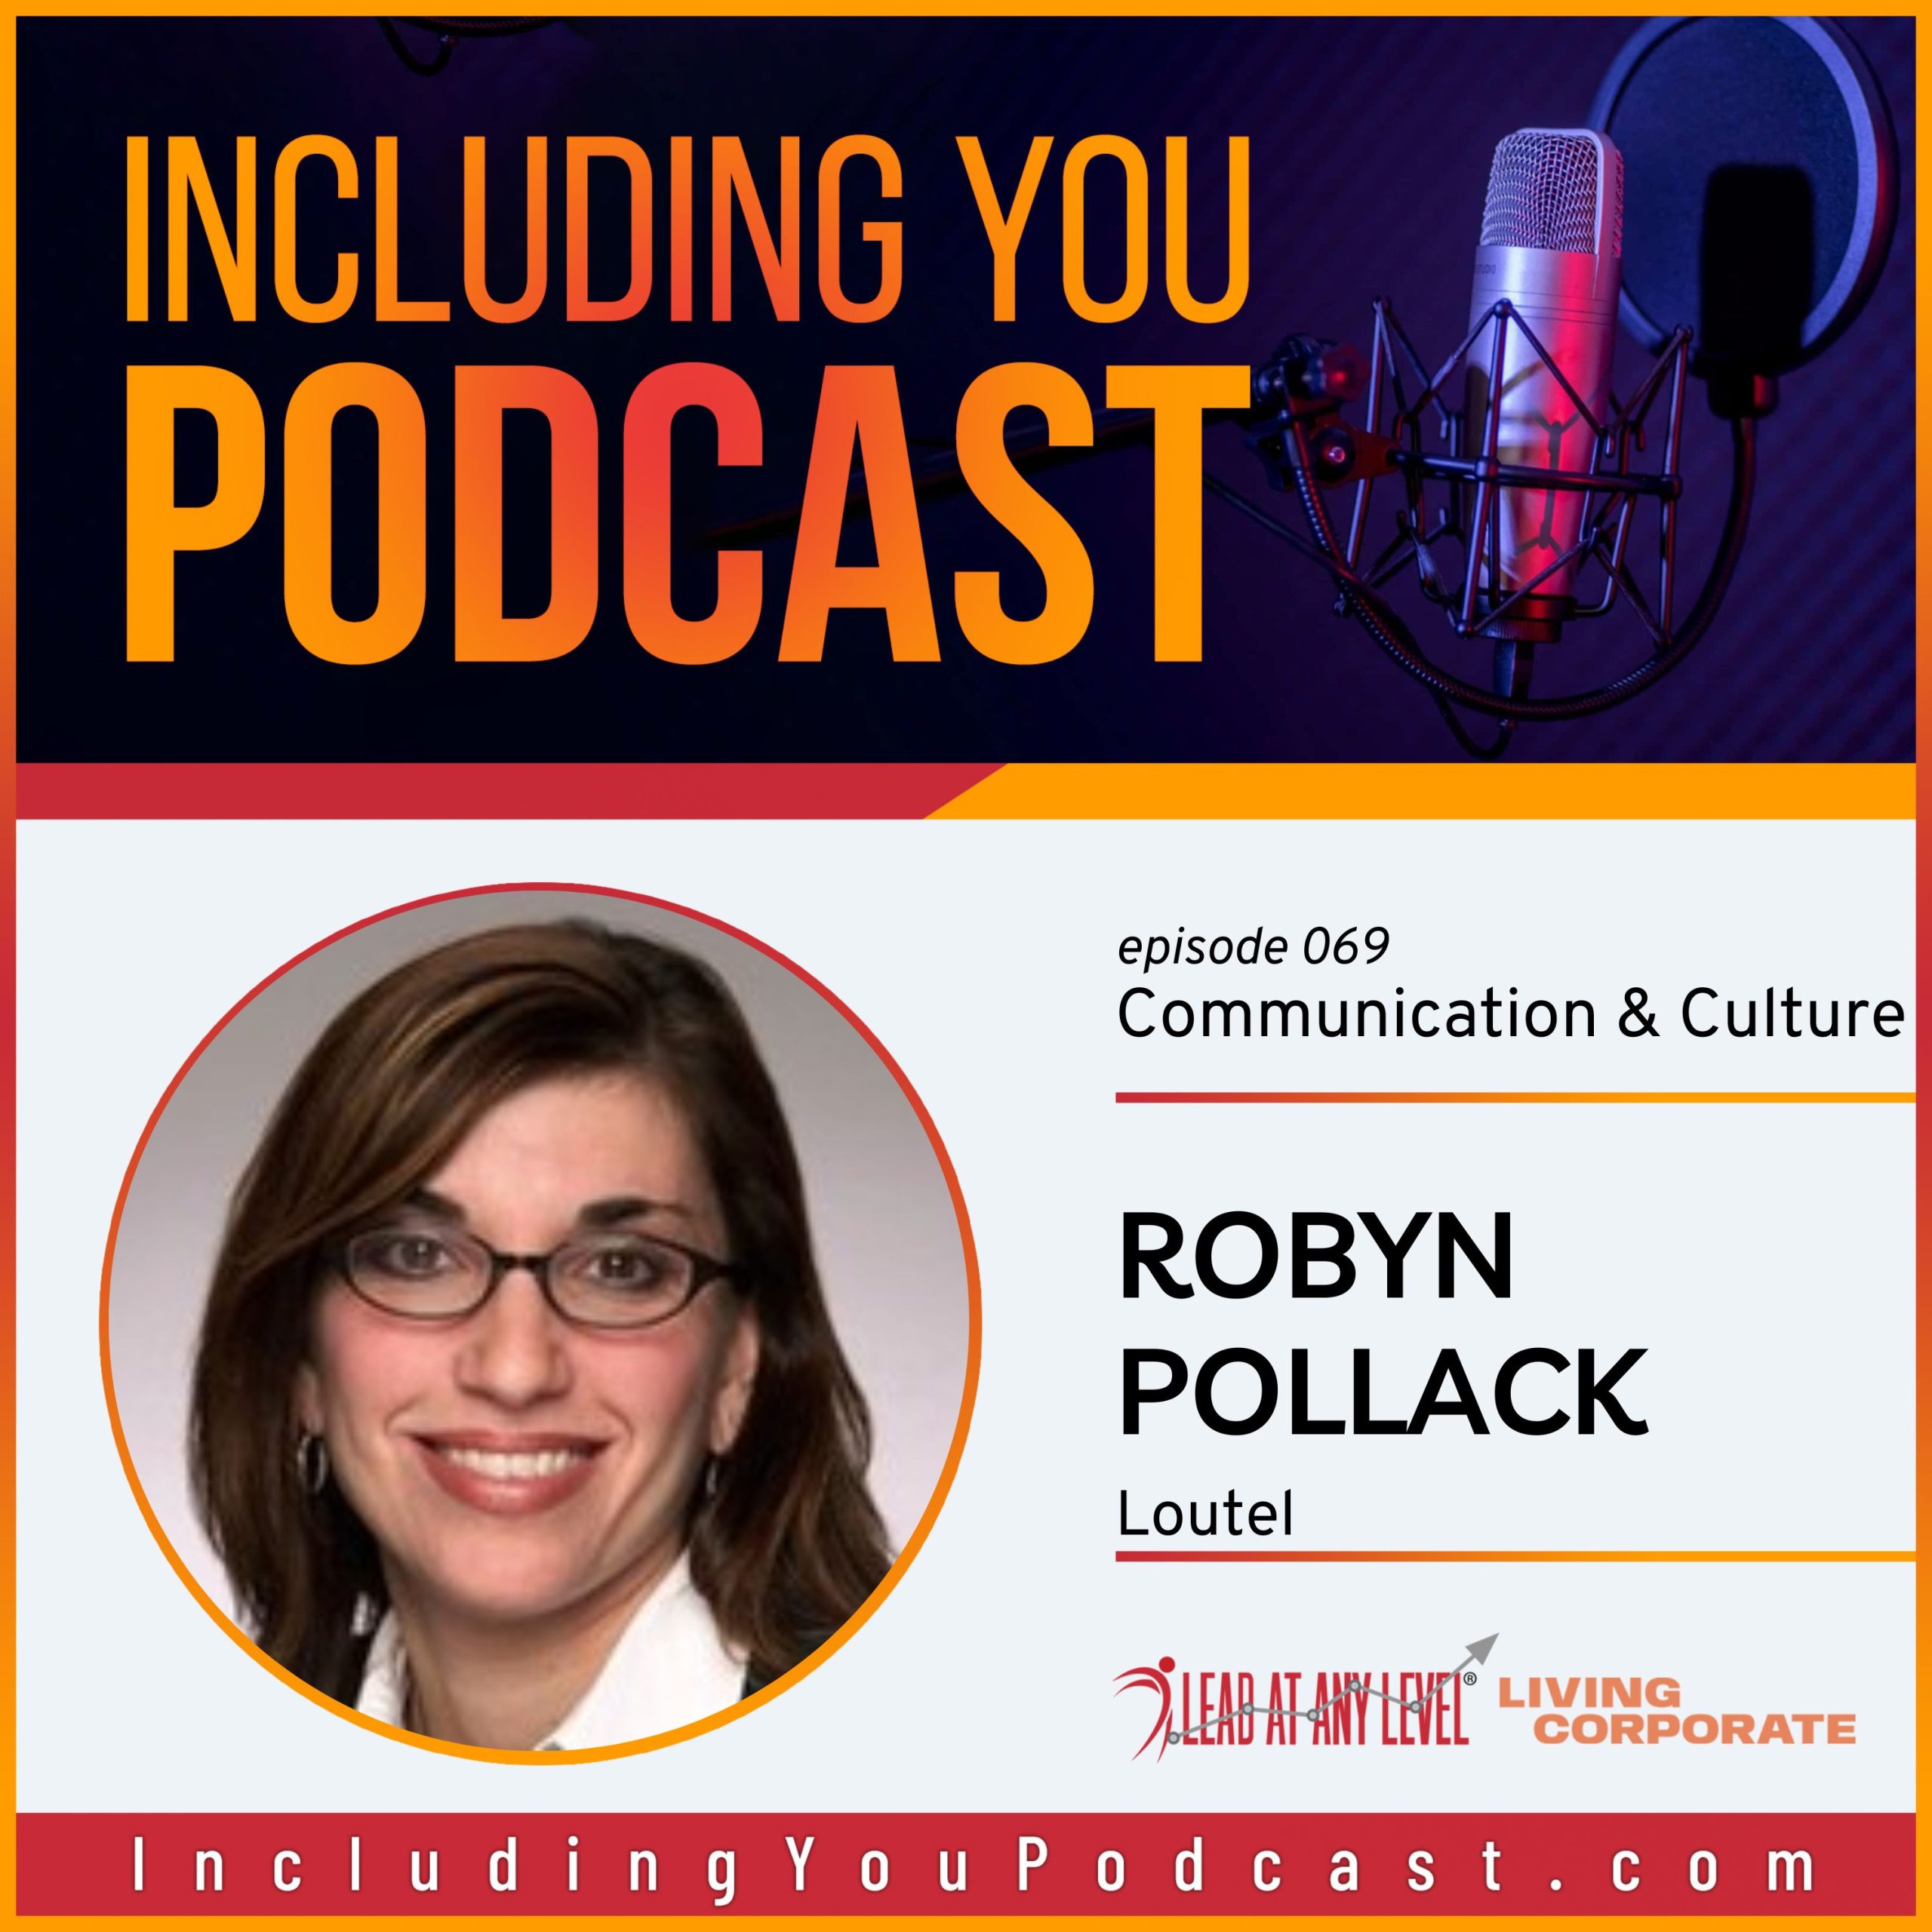 e069. Communication & Culture with Robyn Pollack